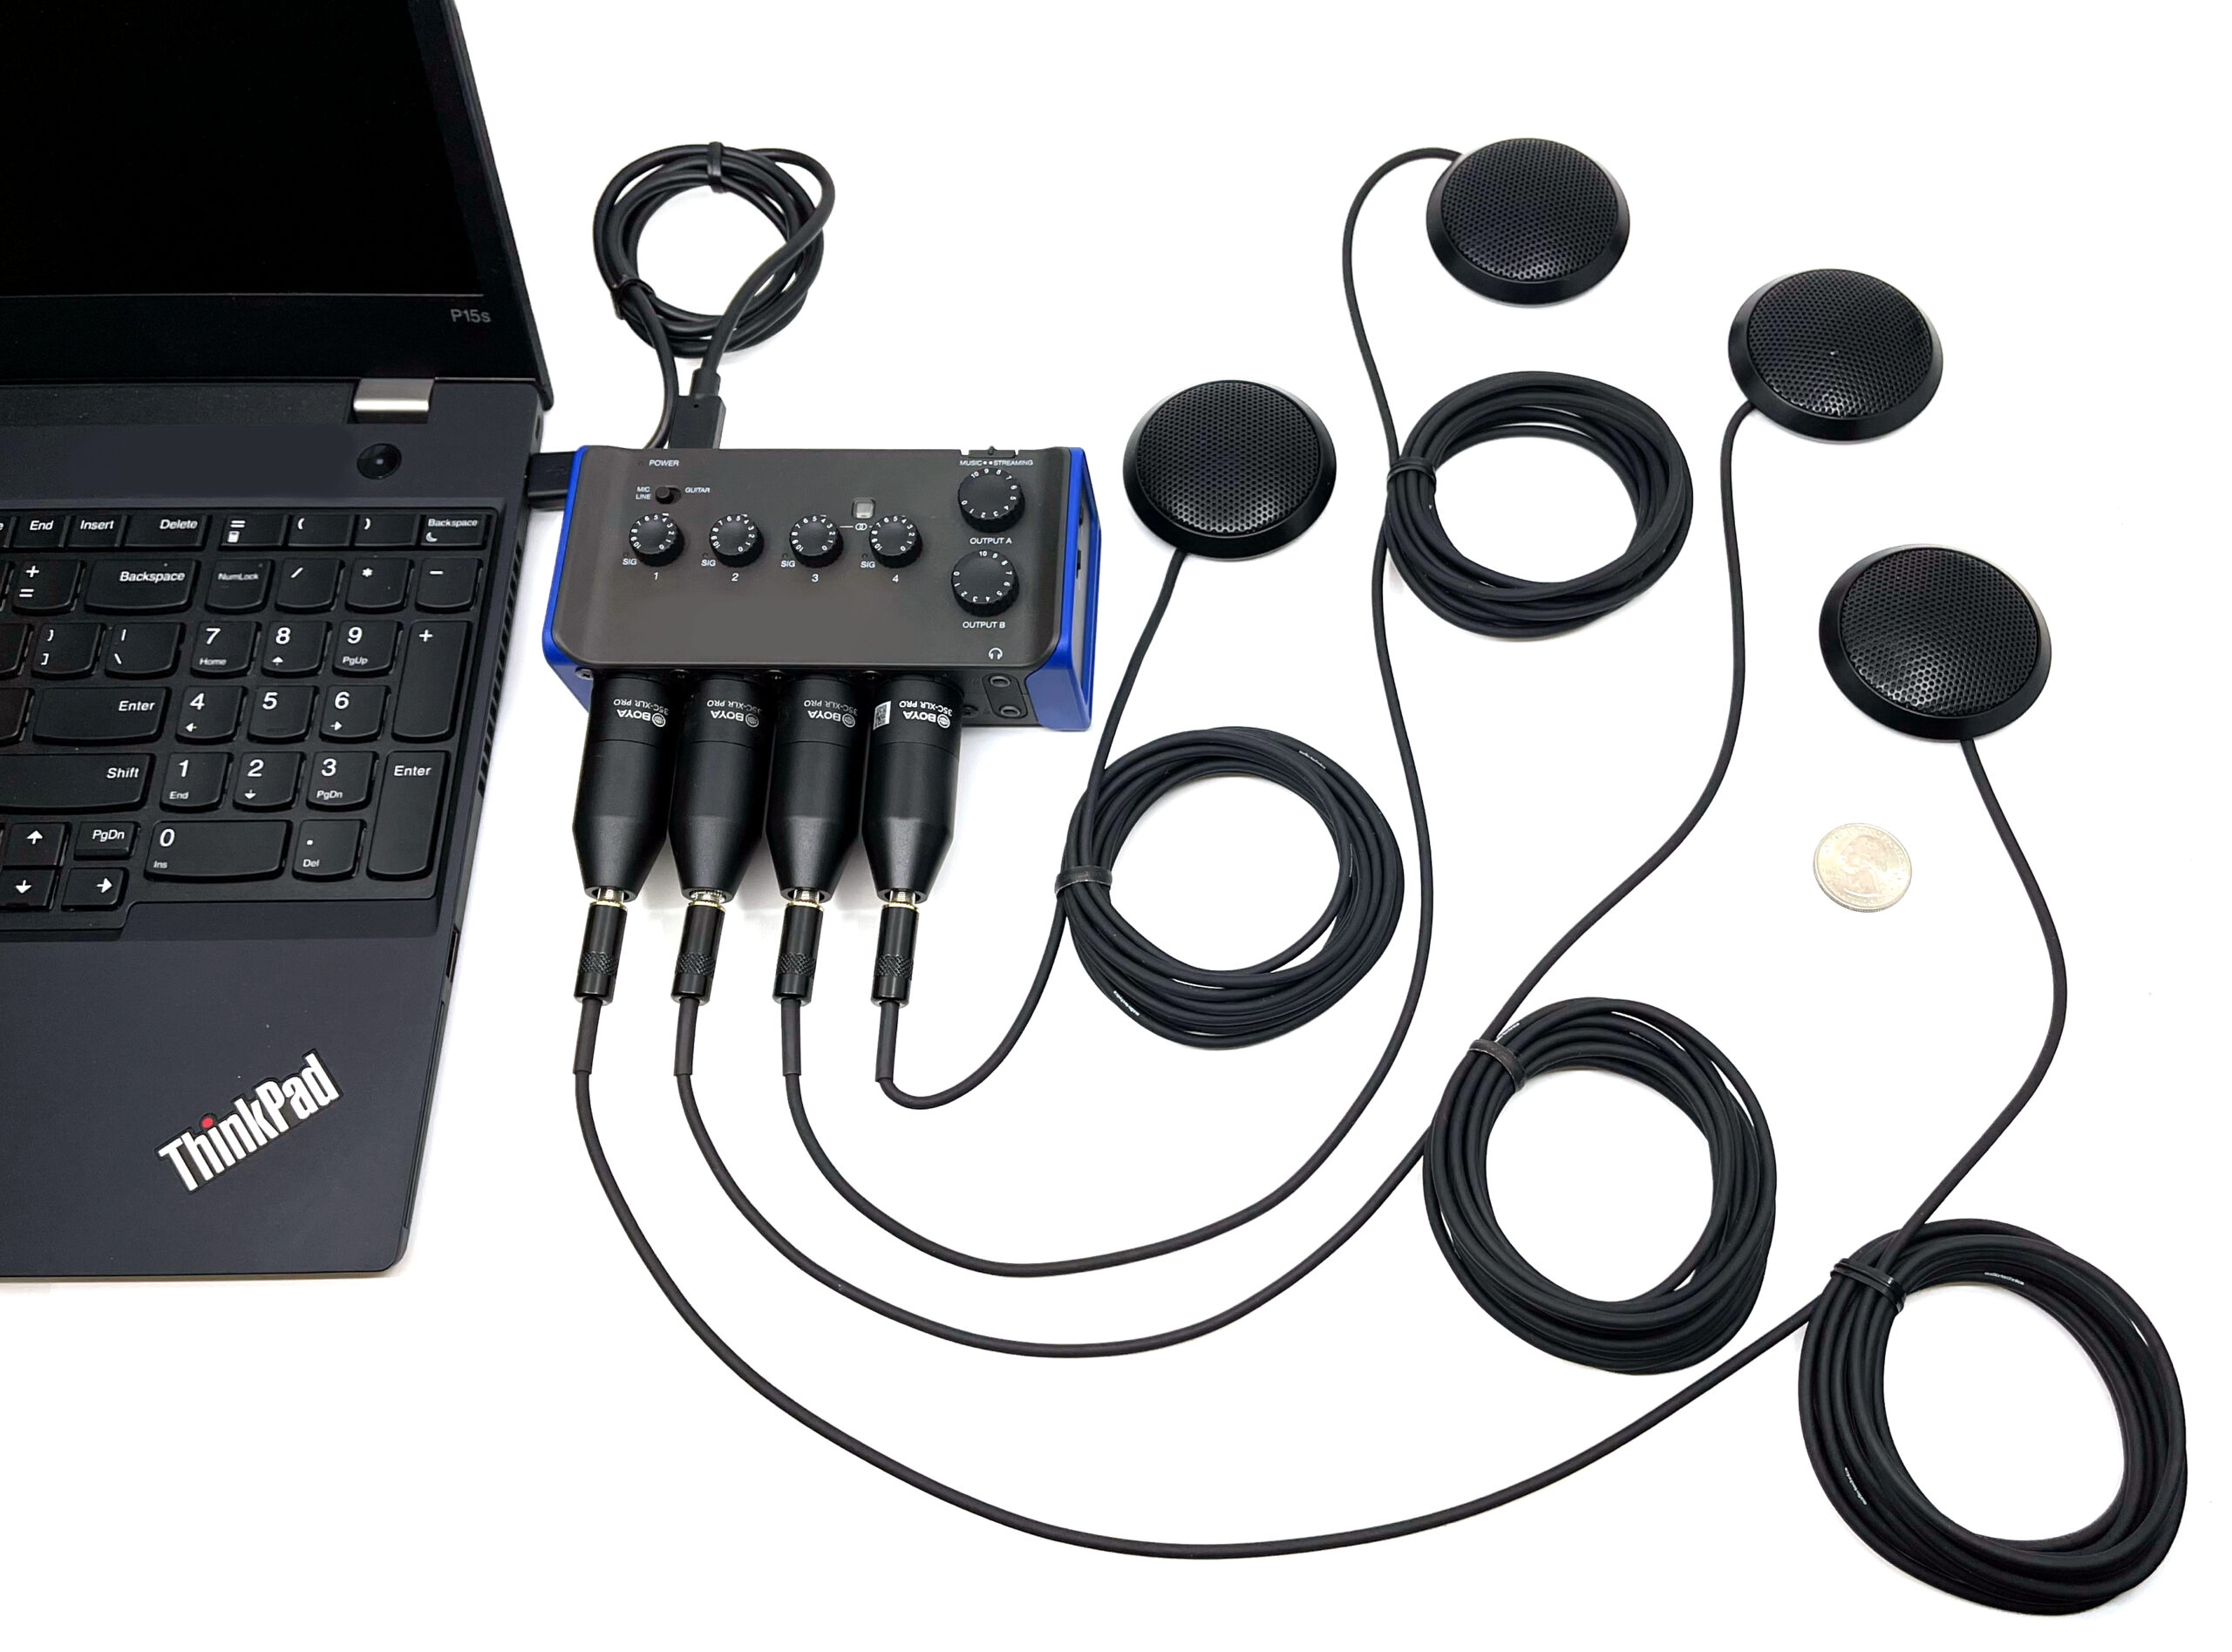 Court Reporter wired microphone system – use up to 4 microphones at the same time Questions & Answers